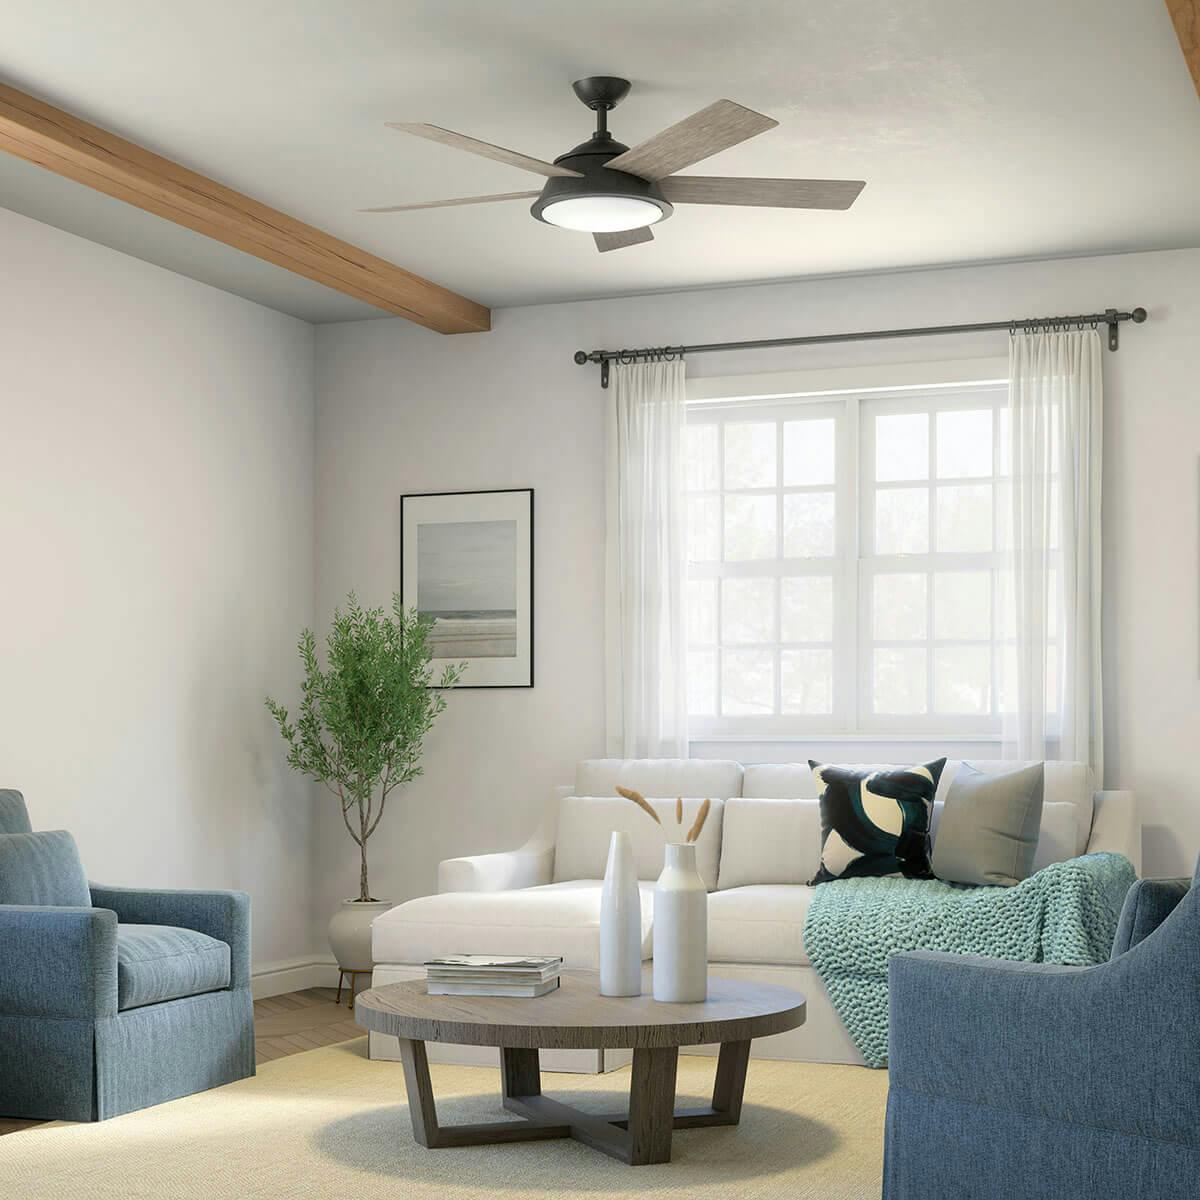 Day time living room image featuring Verdi ceiling fan 310100AVI